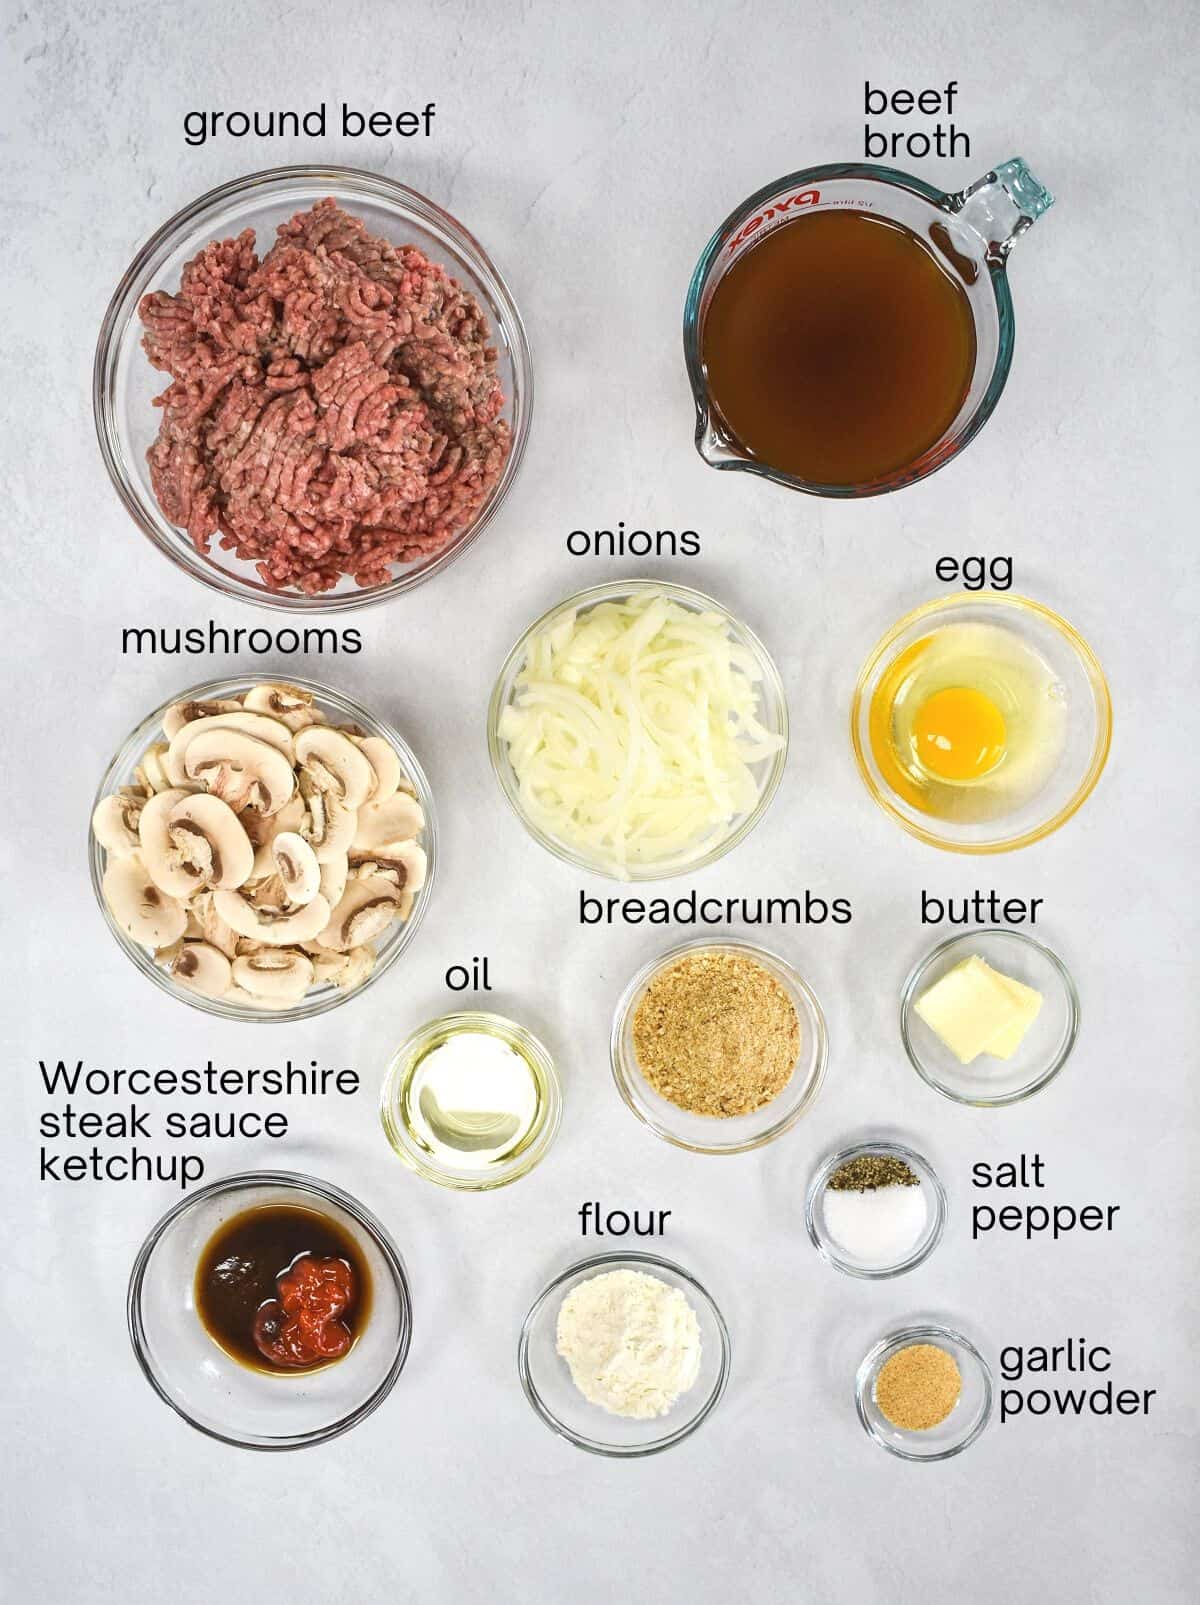 The prepped ingredients for the Salisbury steak arranged in glass bowls on a white table. Each ingredient is labeled with small black letters.